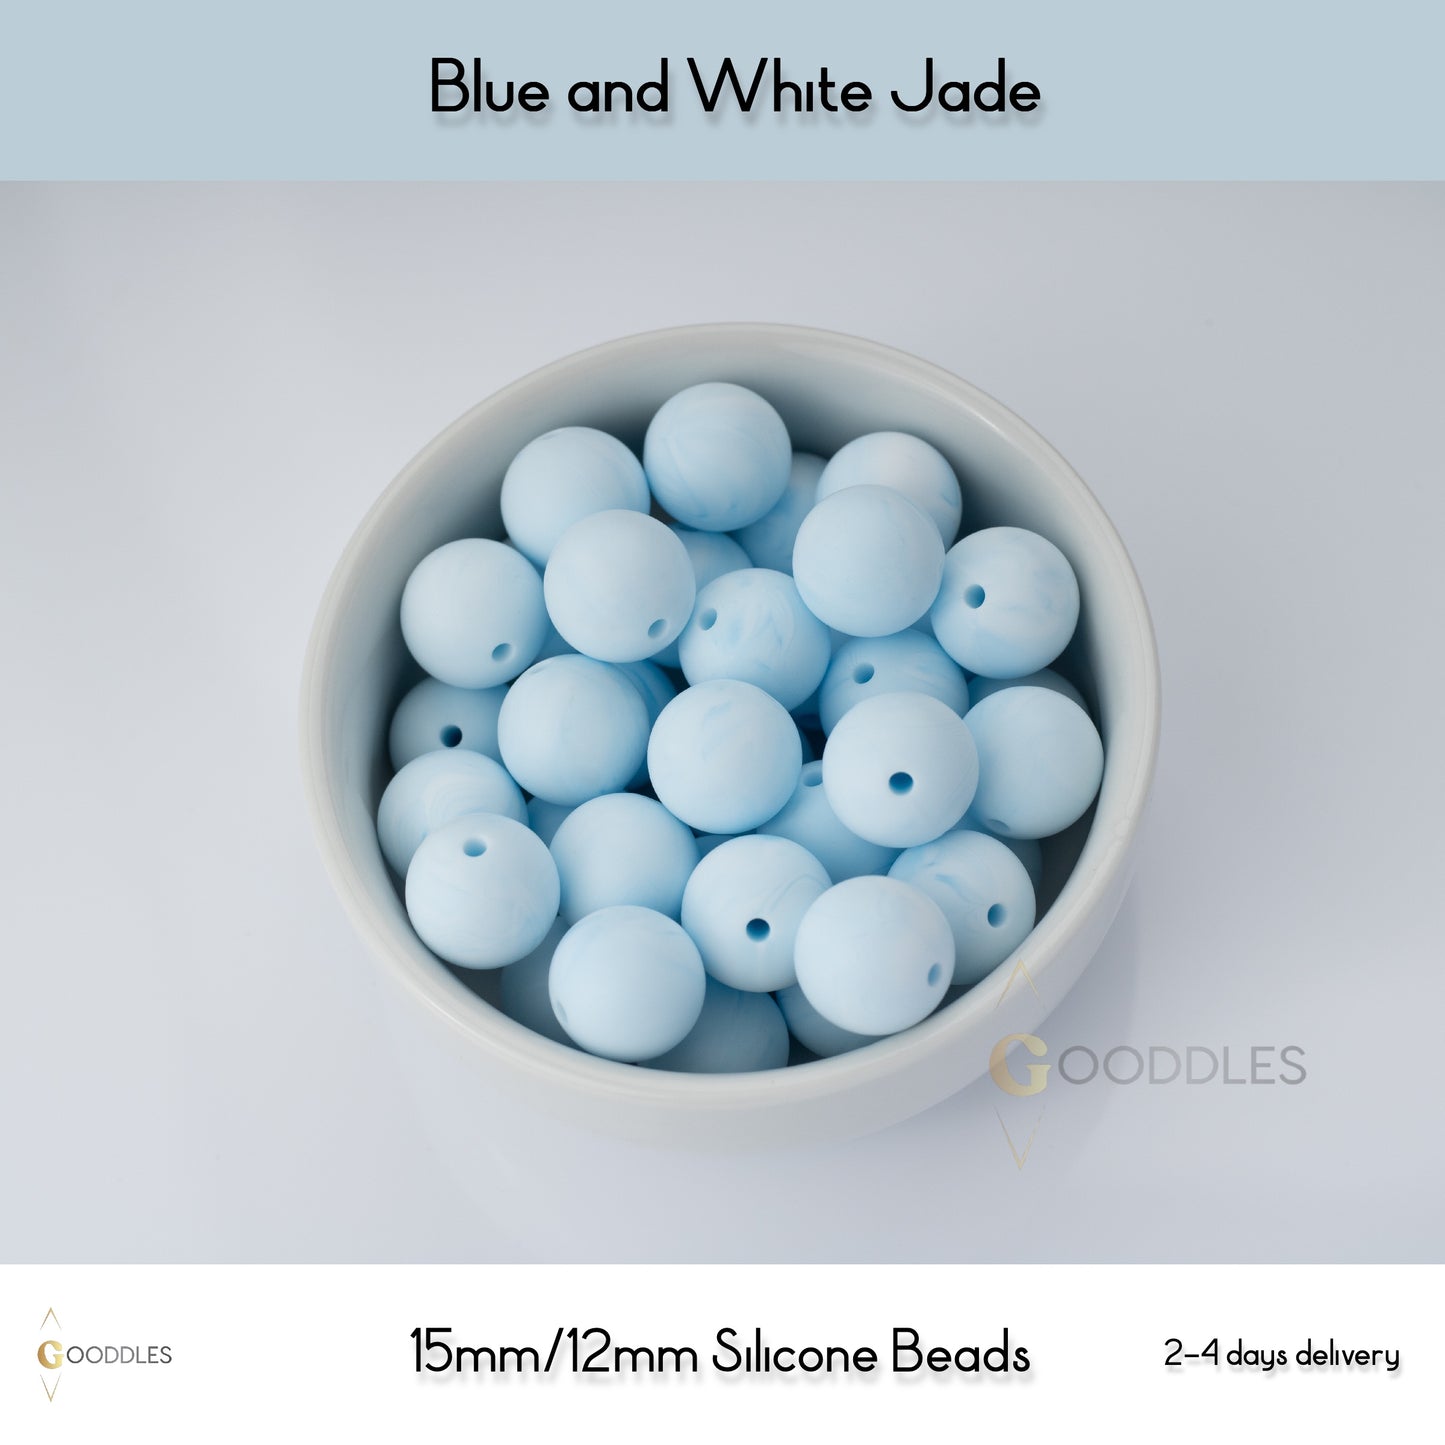 5pcs, Blue and White Jade Silicone Beads Round Silicone Beads